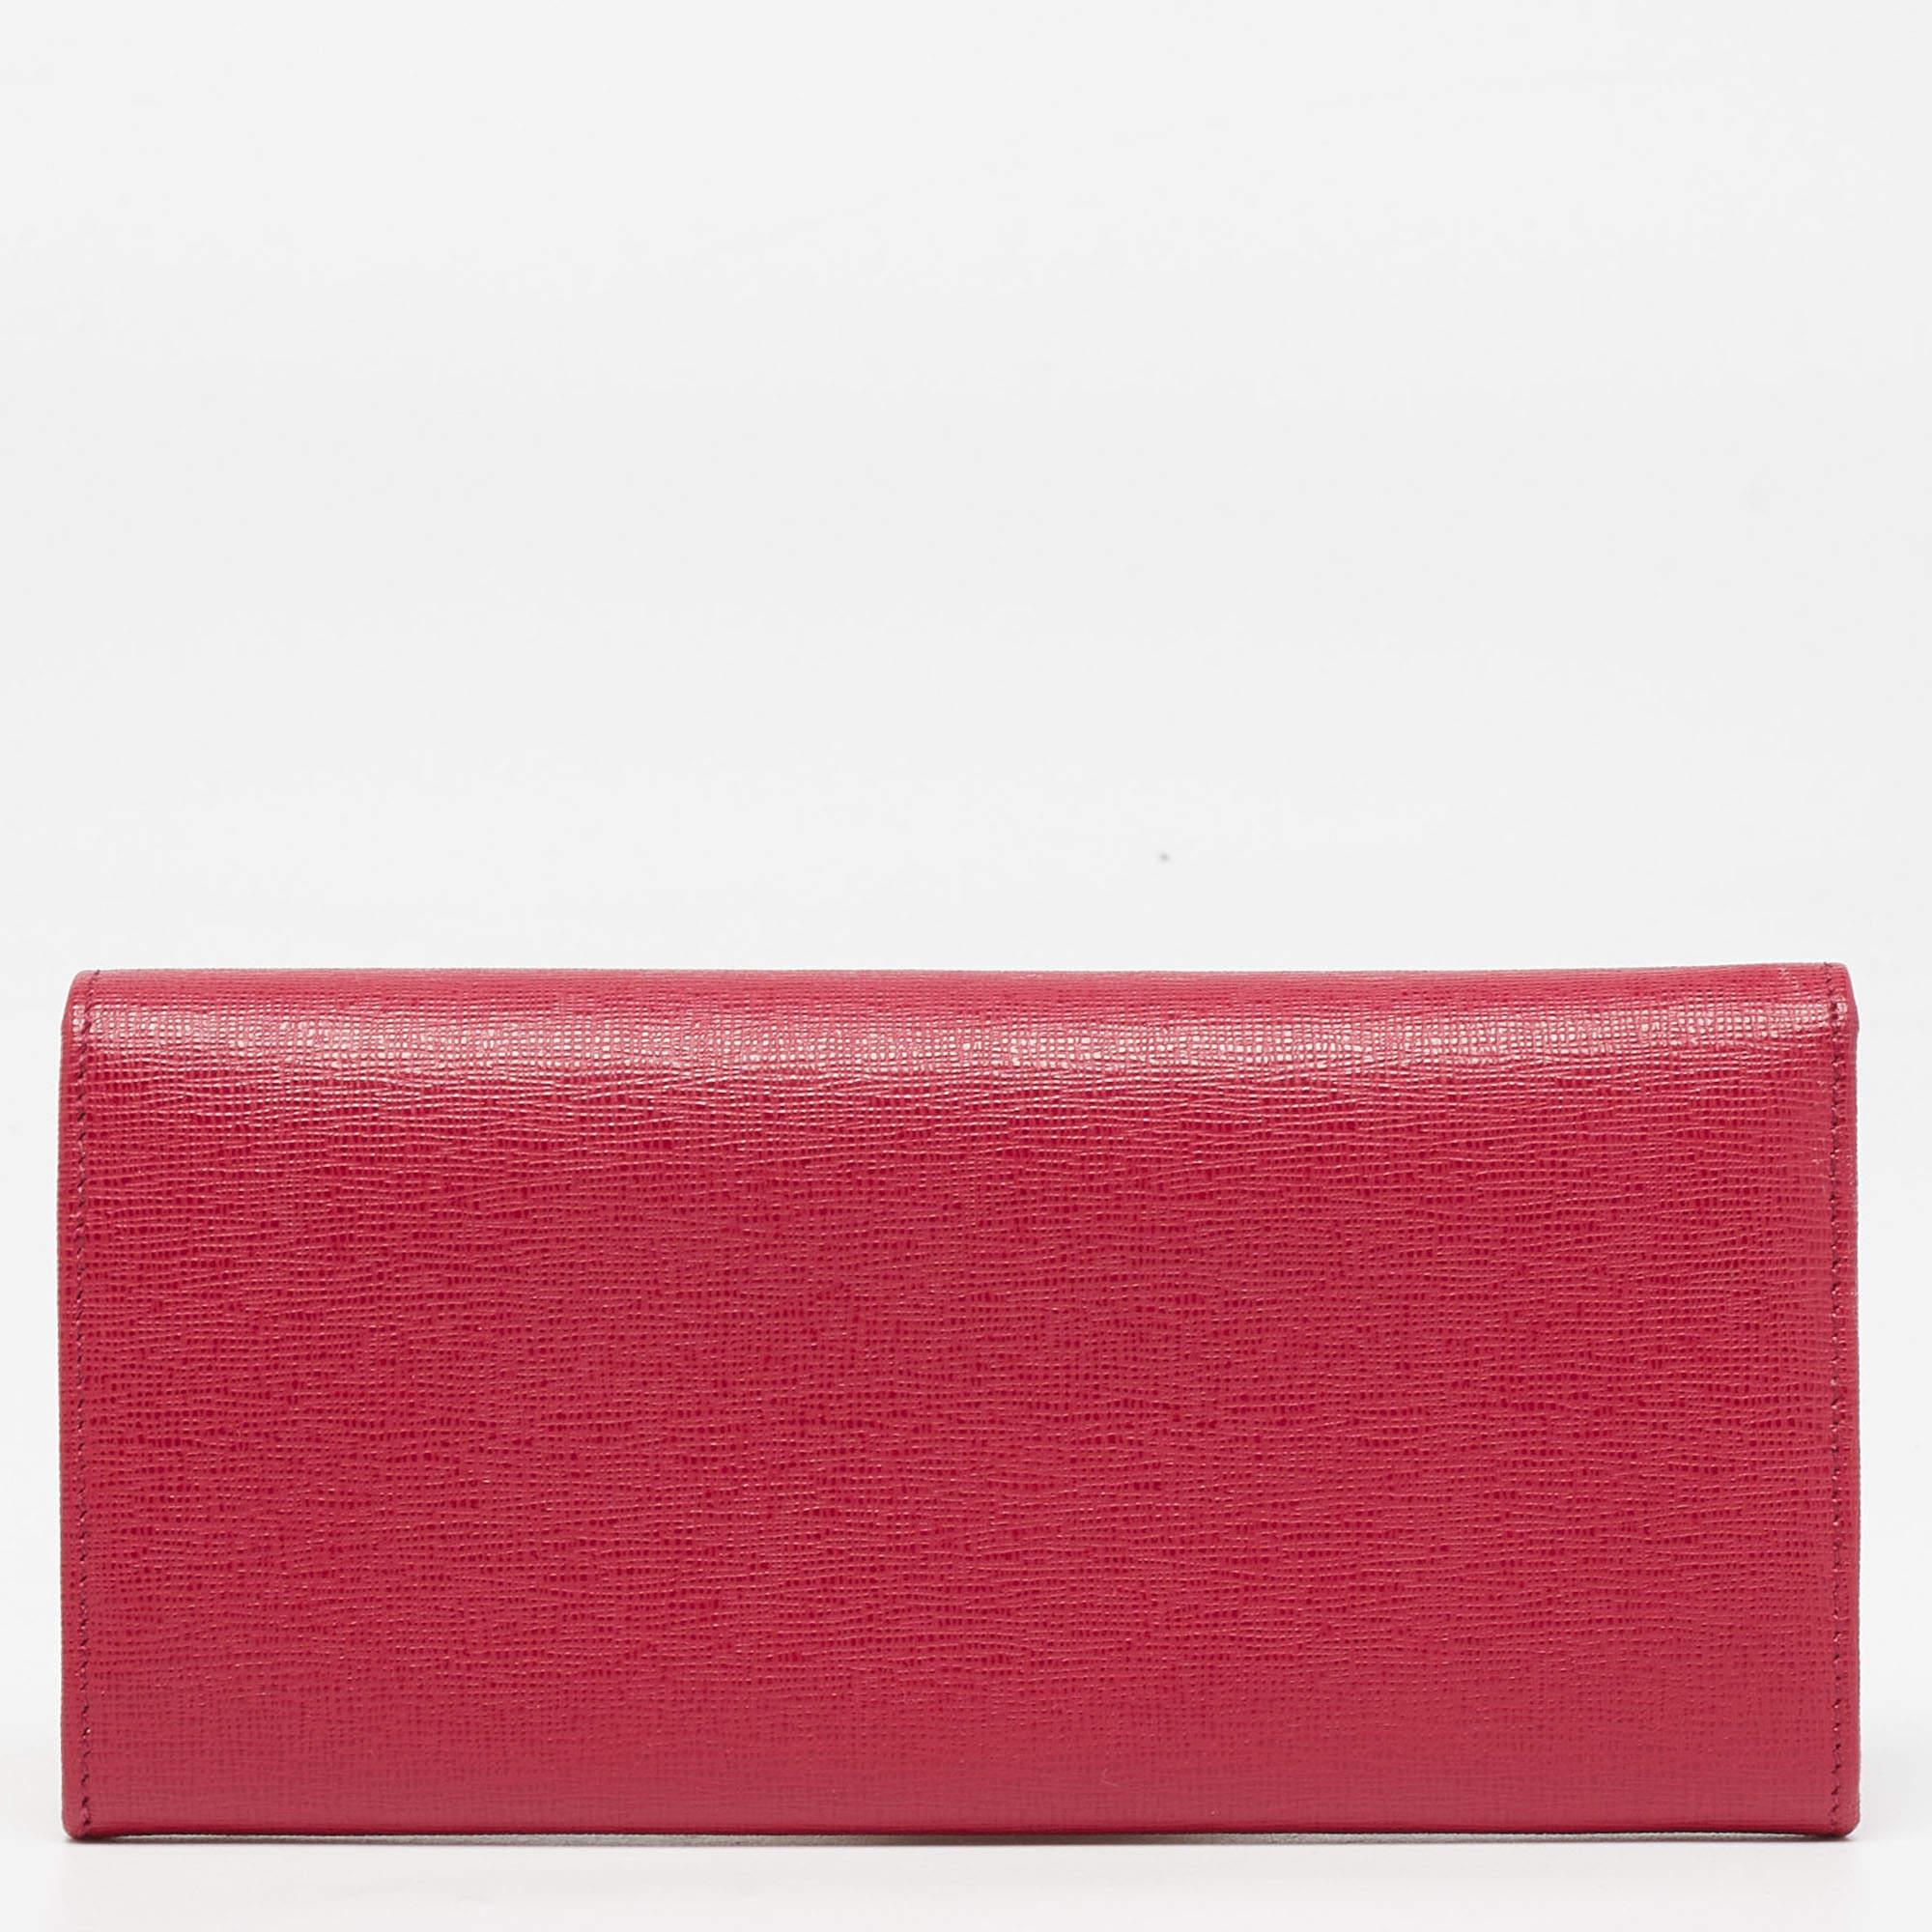 This Fendi wallet is the perfect pick to organize your things. Crafted from leather, this red wallet is accented with gold-tone hardware. The flap closure with concealed fastening features a brand plaque. The leather and fabric lined interior houses